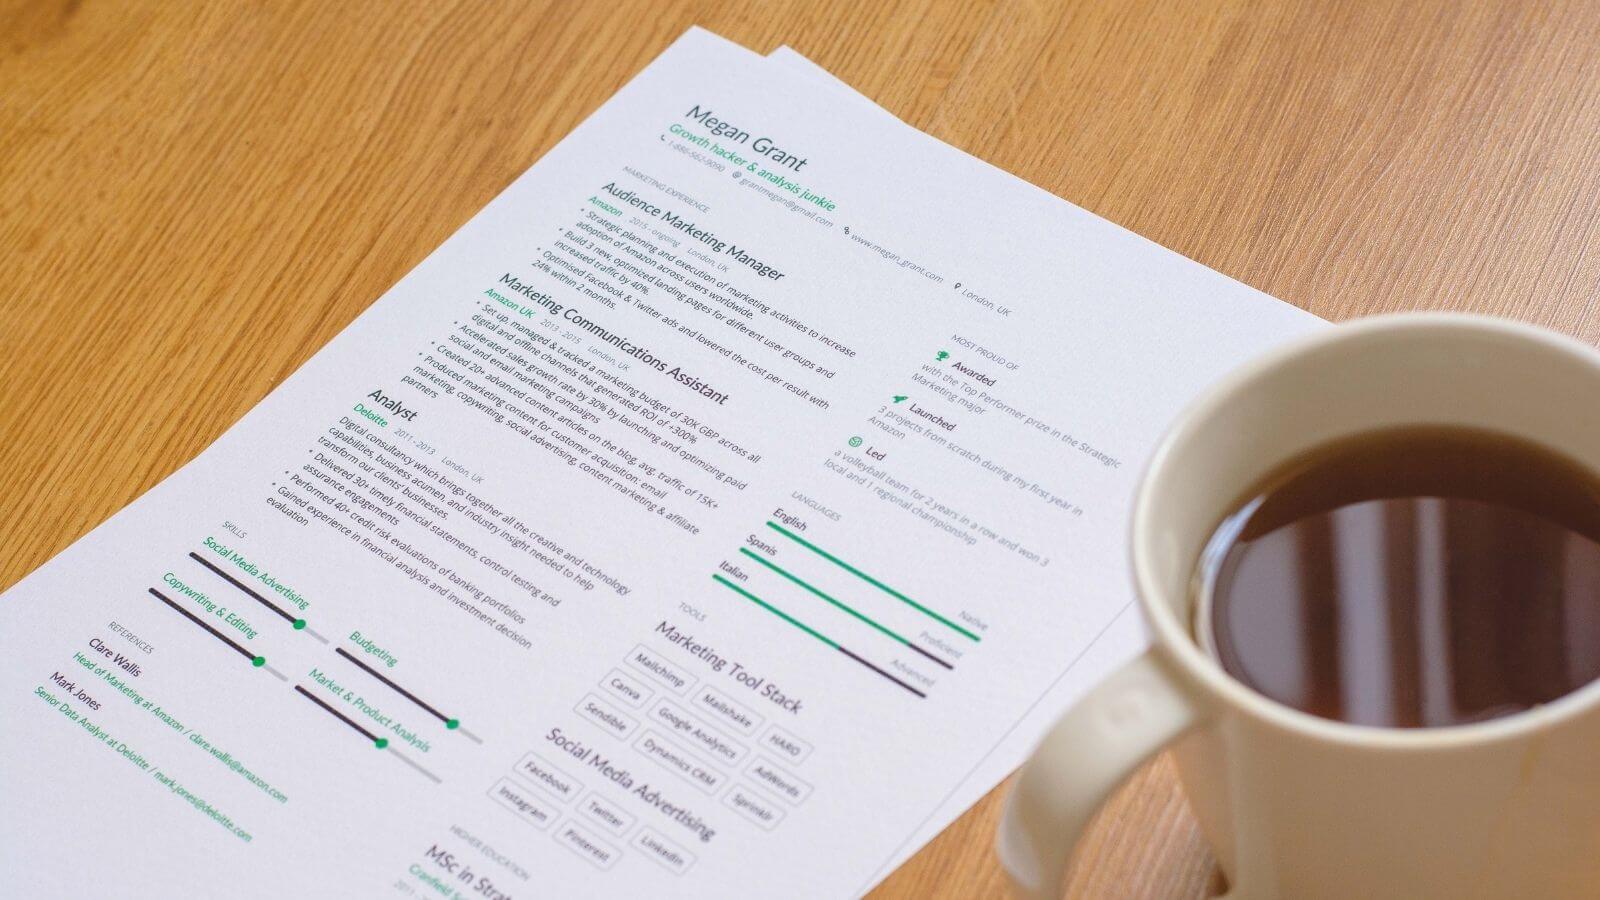 How To Improve Your Resume in Under 30 Minutes